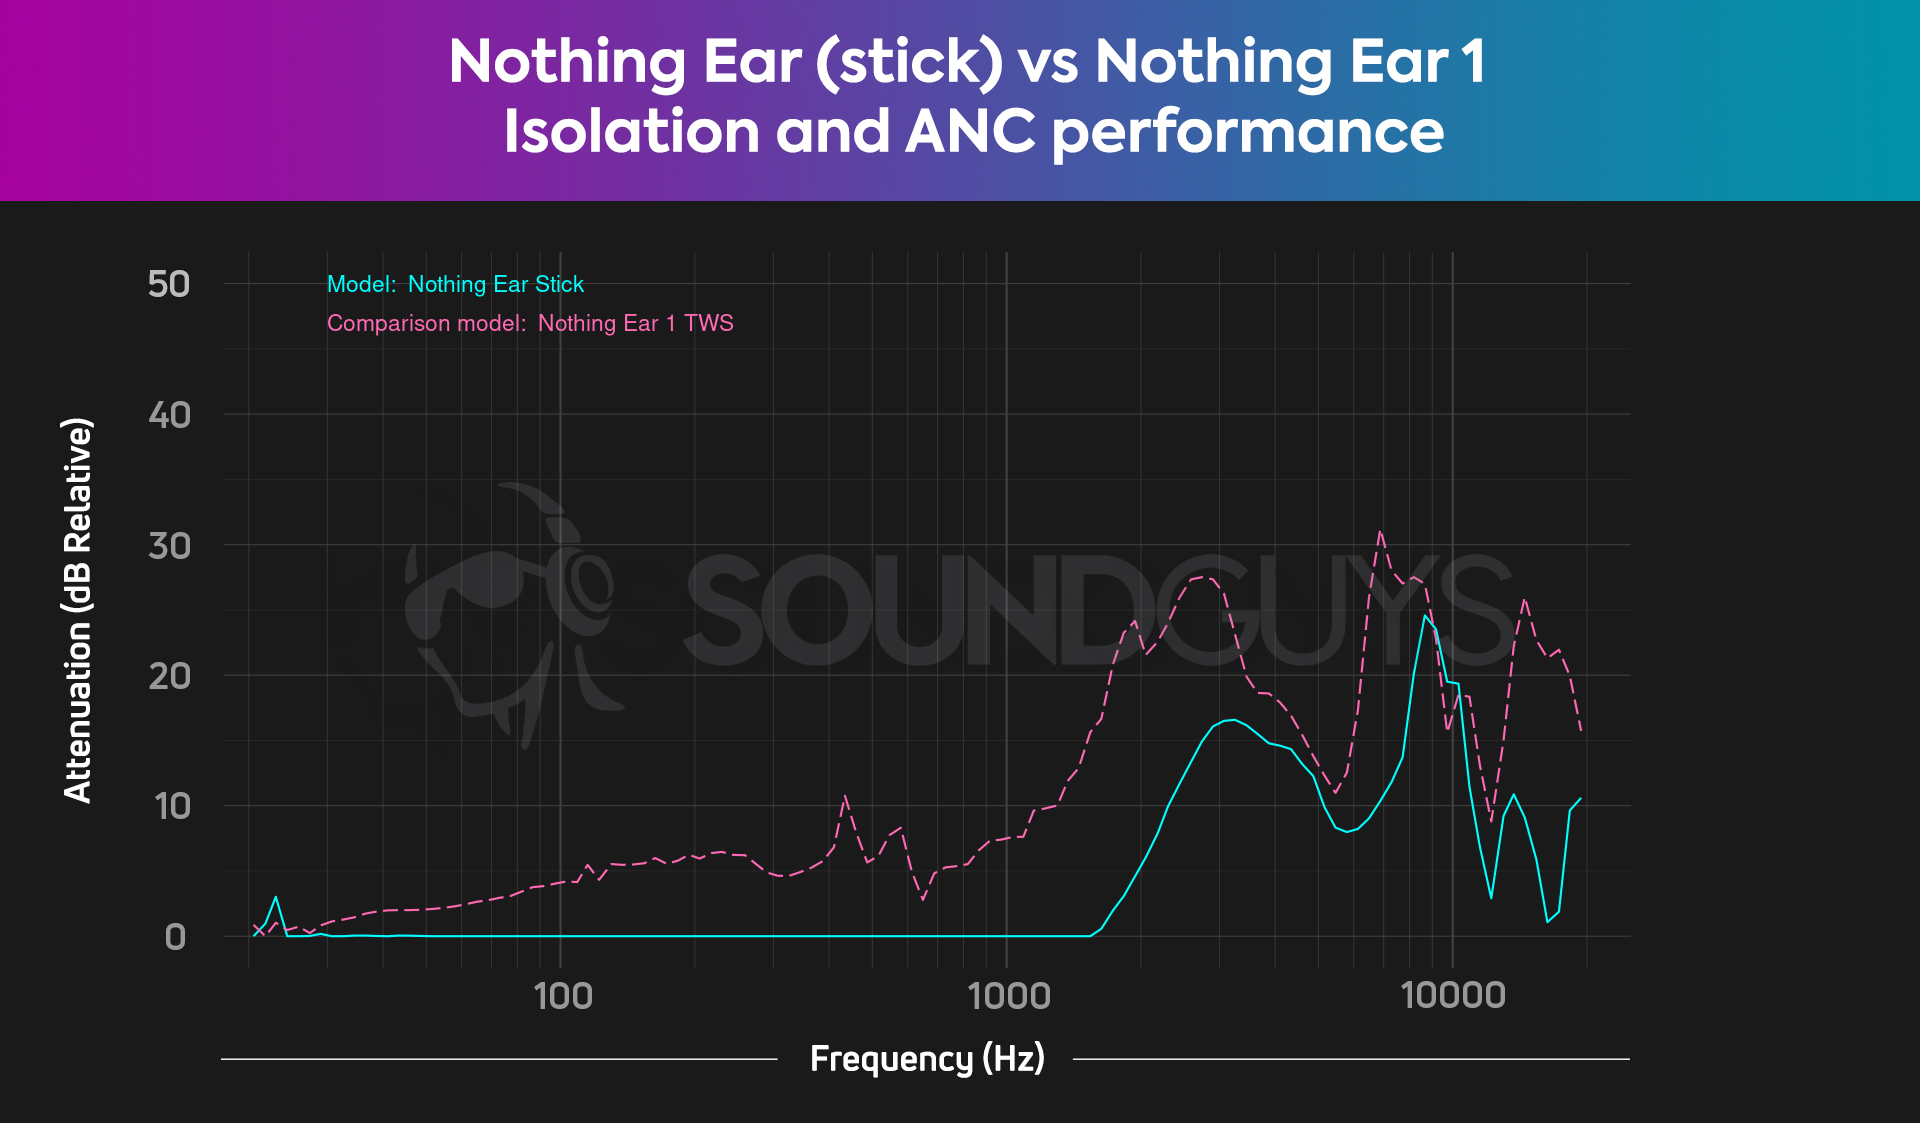 A chart shows the combined ANC and isolation of the Nothing Ear 1 with the isolation of the Nothing Ear stick.